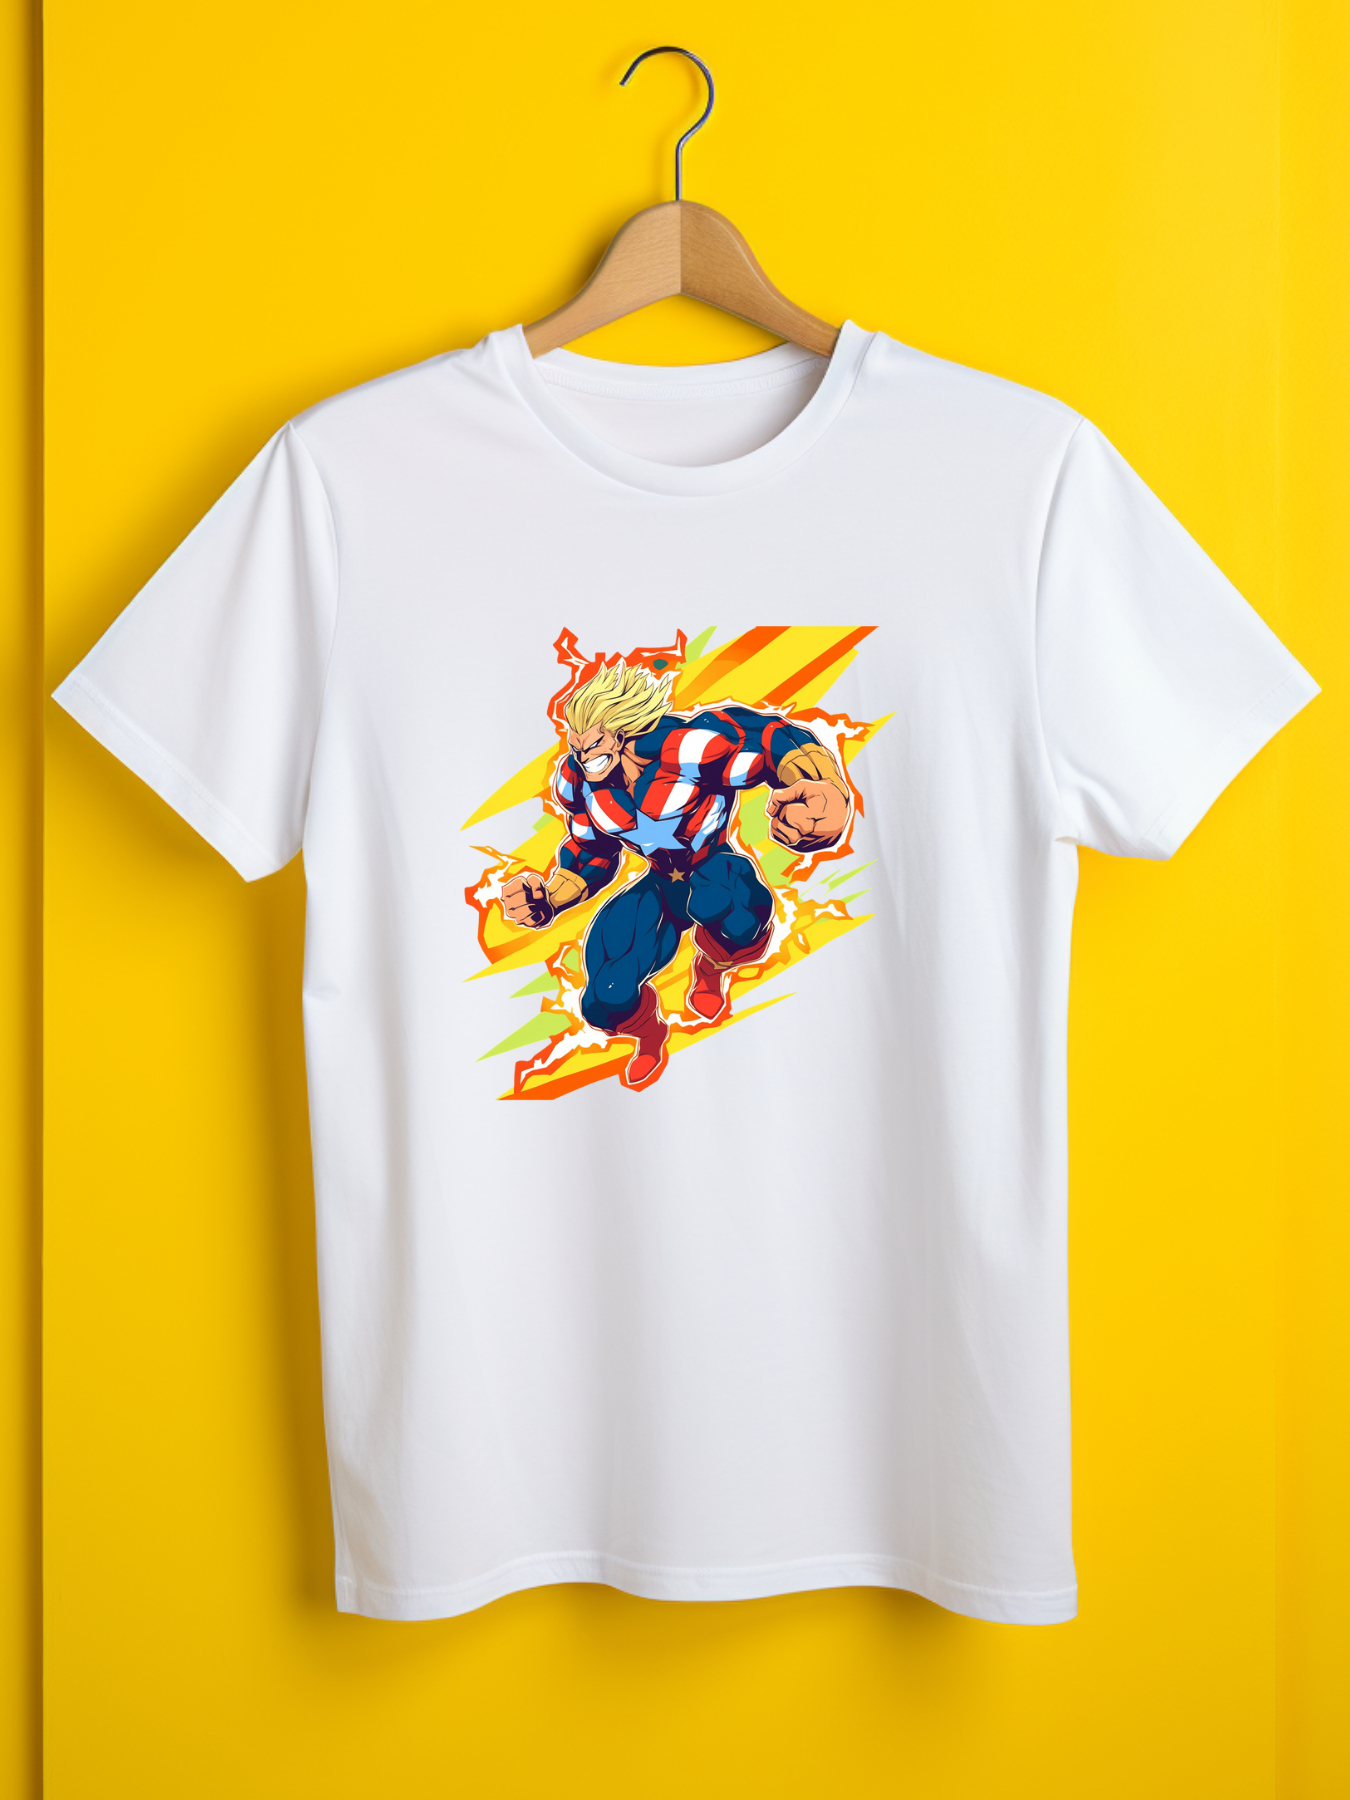 All Might Printed T-Shirt 106